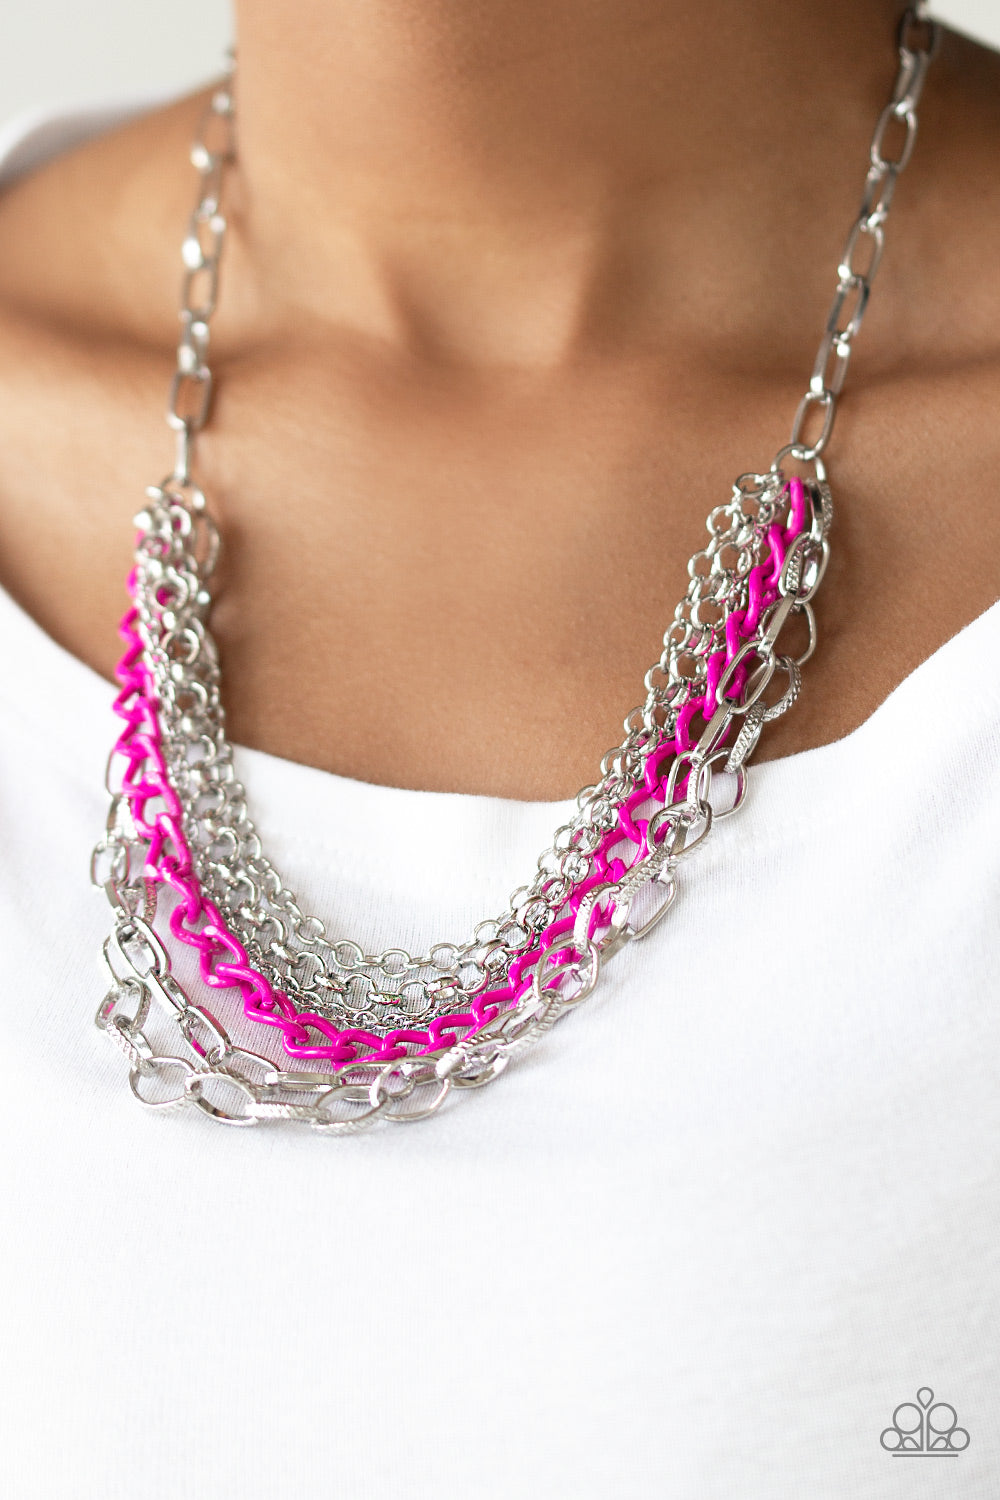 COLOR BOMB - PINK AND SILVER MULTI CHAIN INDUSTRIAL NECKLACE